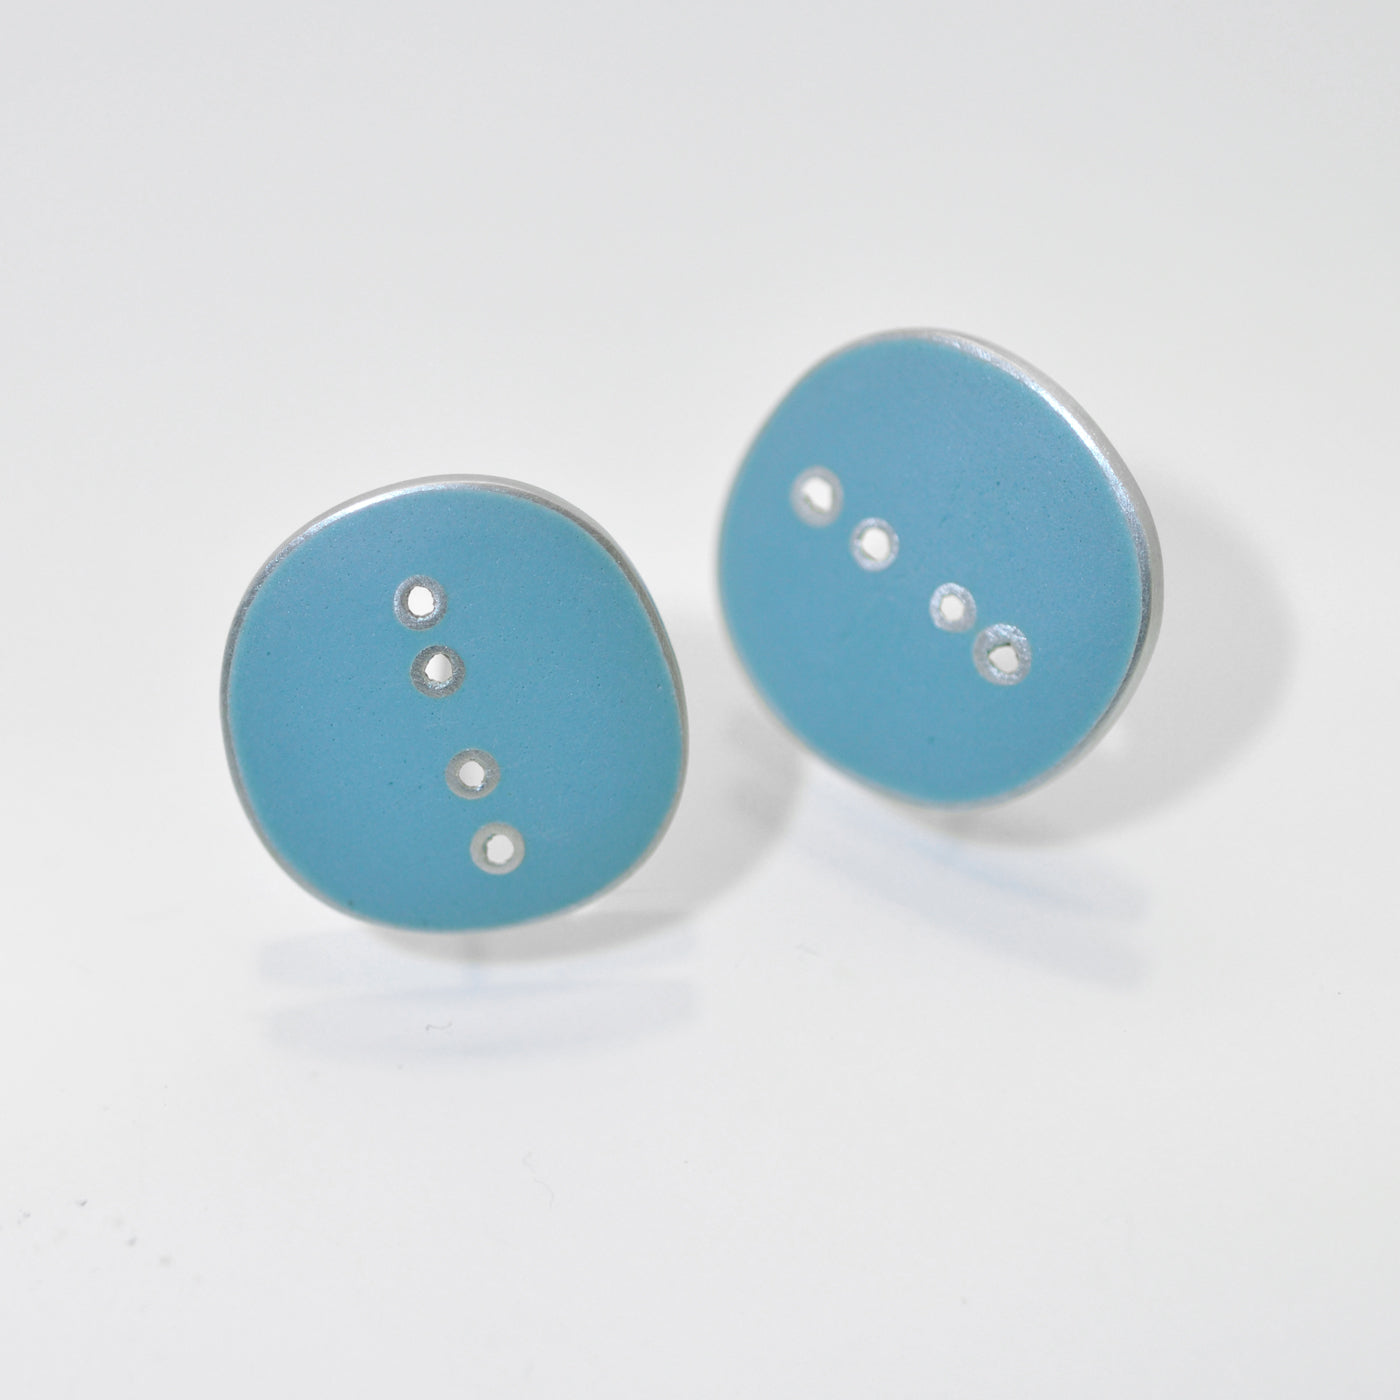 Stud earrings, ‘Button’ series, turquiose